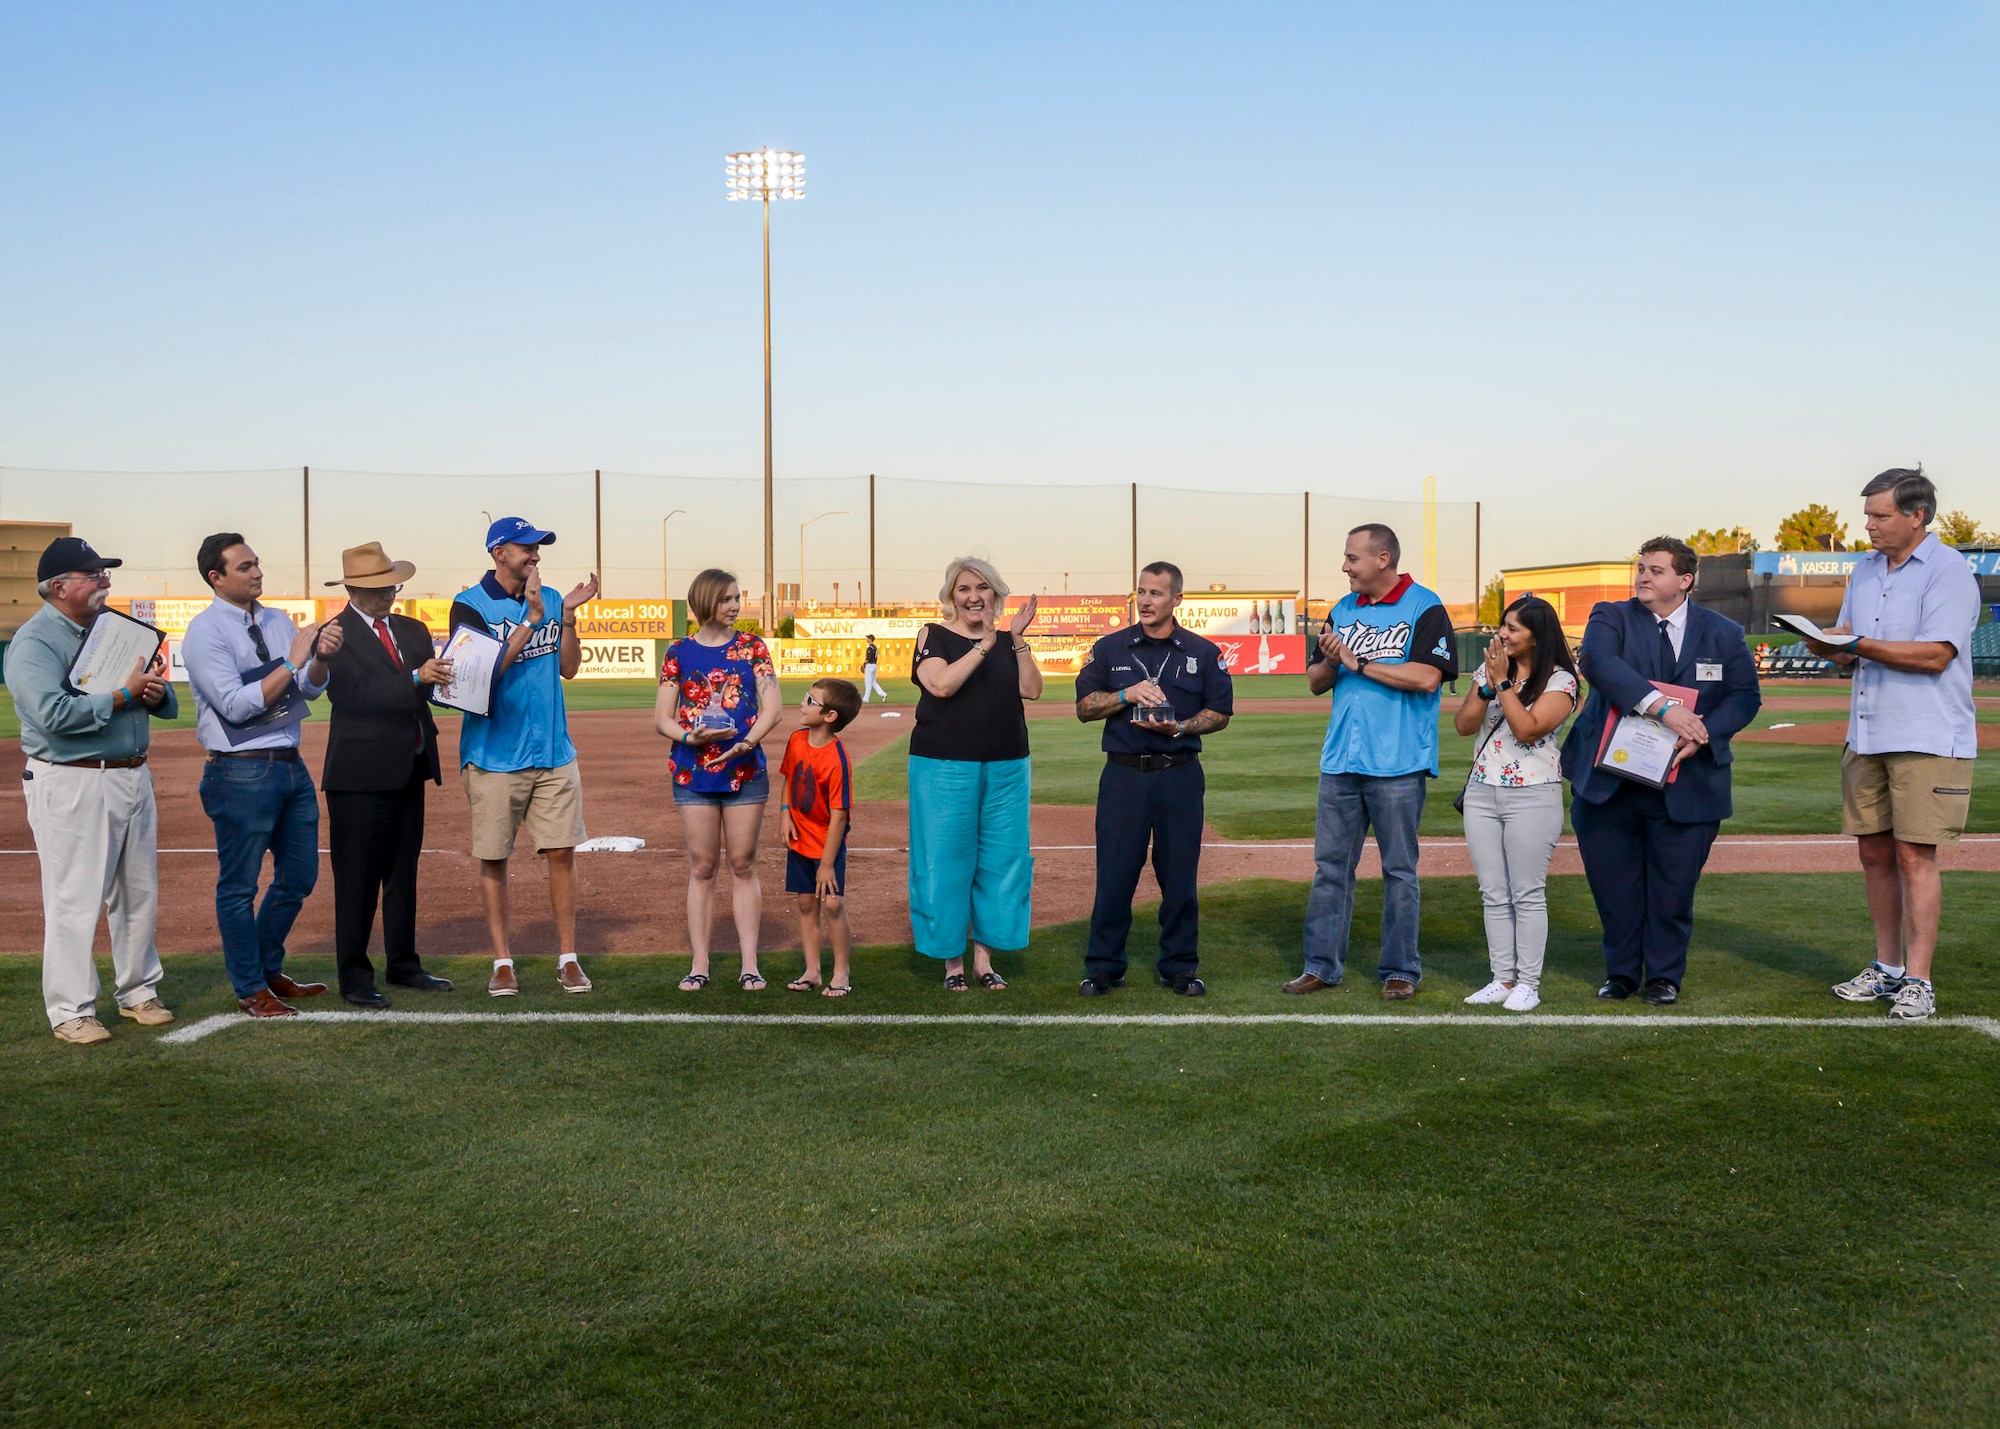 Tech. Sgt. Janna Ybarra, 412th Medical Group, and Lead Firefighter James Levell, 812th Civil Engineer Squadron (pictured with awards) are applauded after receiving the Bank of America/Merrill Military Service Before Self Award during a Lancaster JetHawks game at the Hangar baseball stadium in Lancaster, California, Aug. 24. (U.S. Air Force photo by Giancarlo Casem)